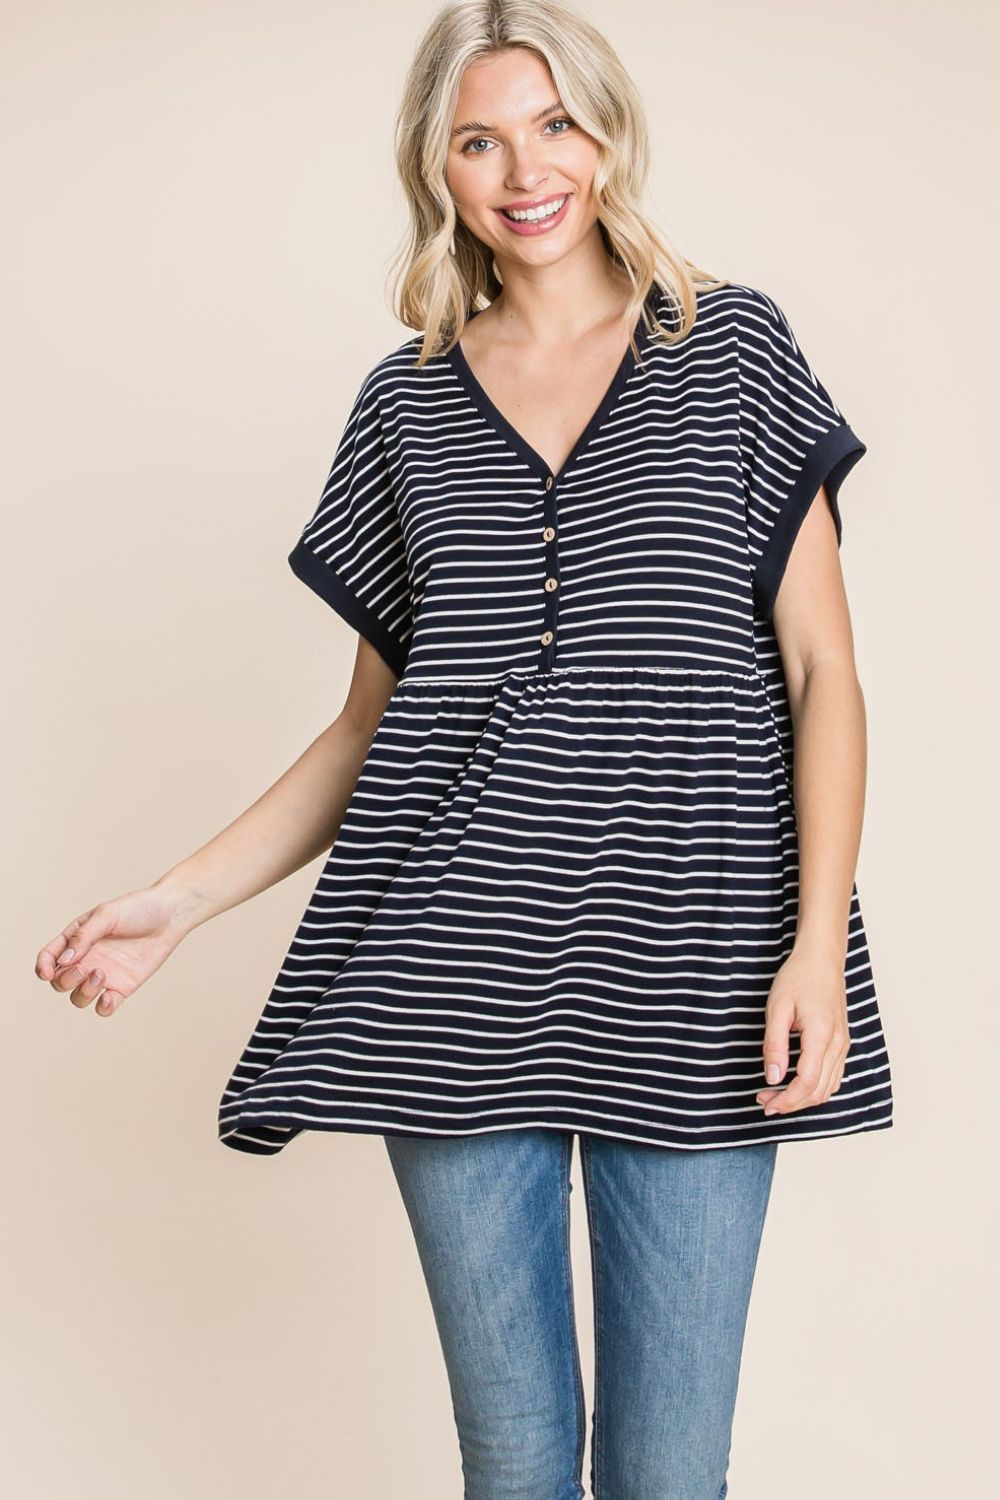 Cotton Bleu by Nu Label Striped Button Front Baby Doll Top Trendsi